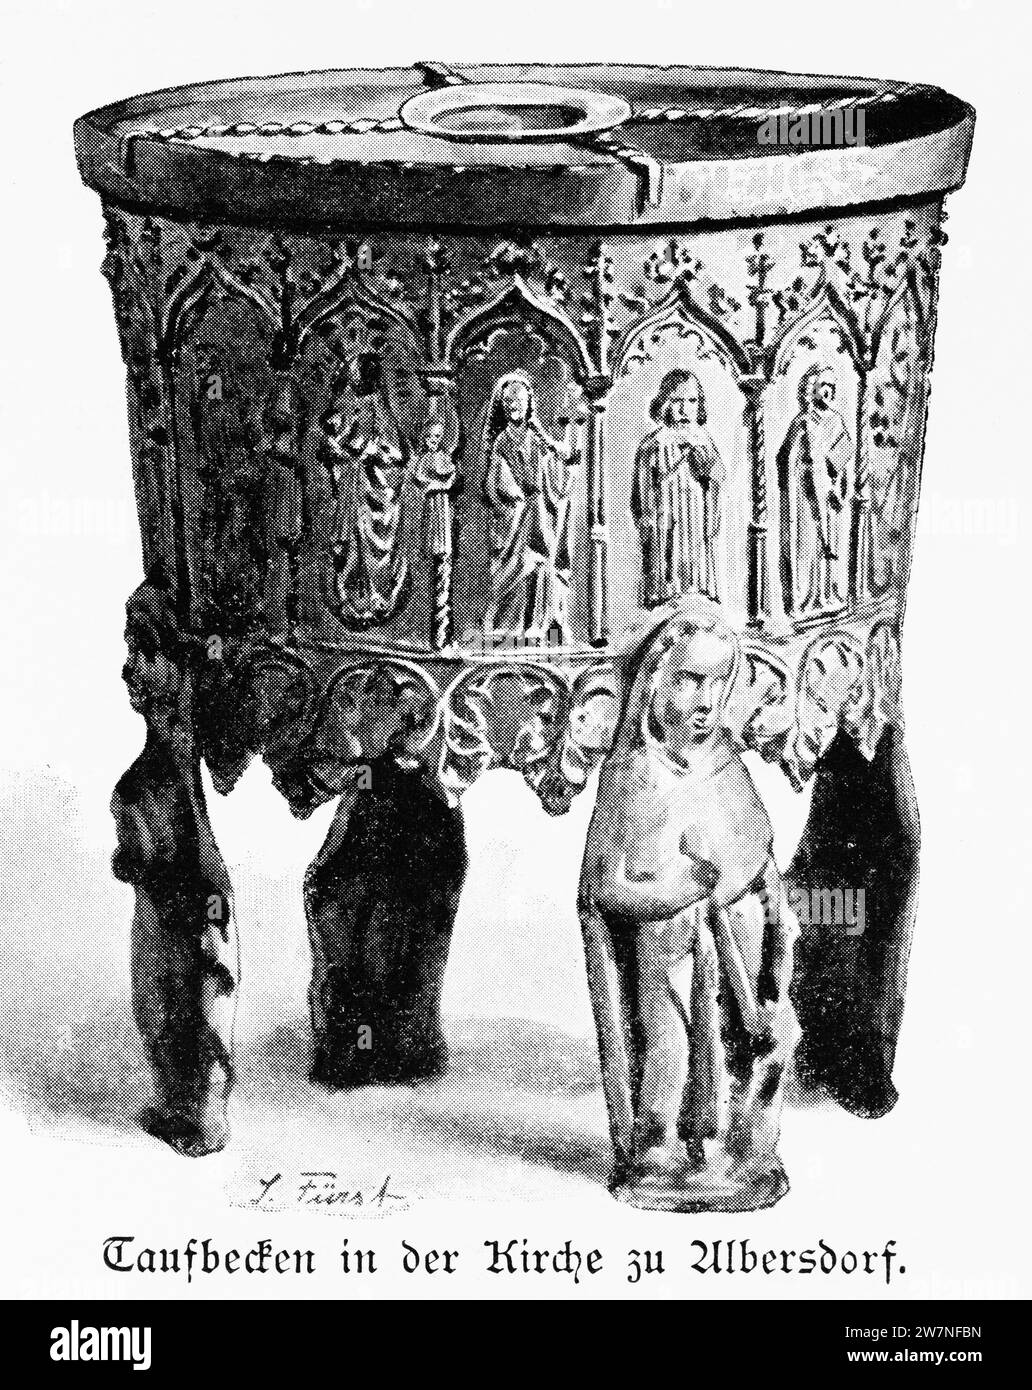 Baptistery in St. Remigius Church of Albersdorf, Dithmarschen, Schleswig-Holstein, Northern Germany, Central Europe, histrorical Illustration 1896 Stock Photo